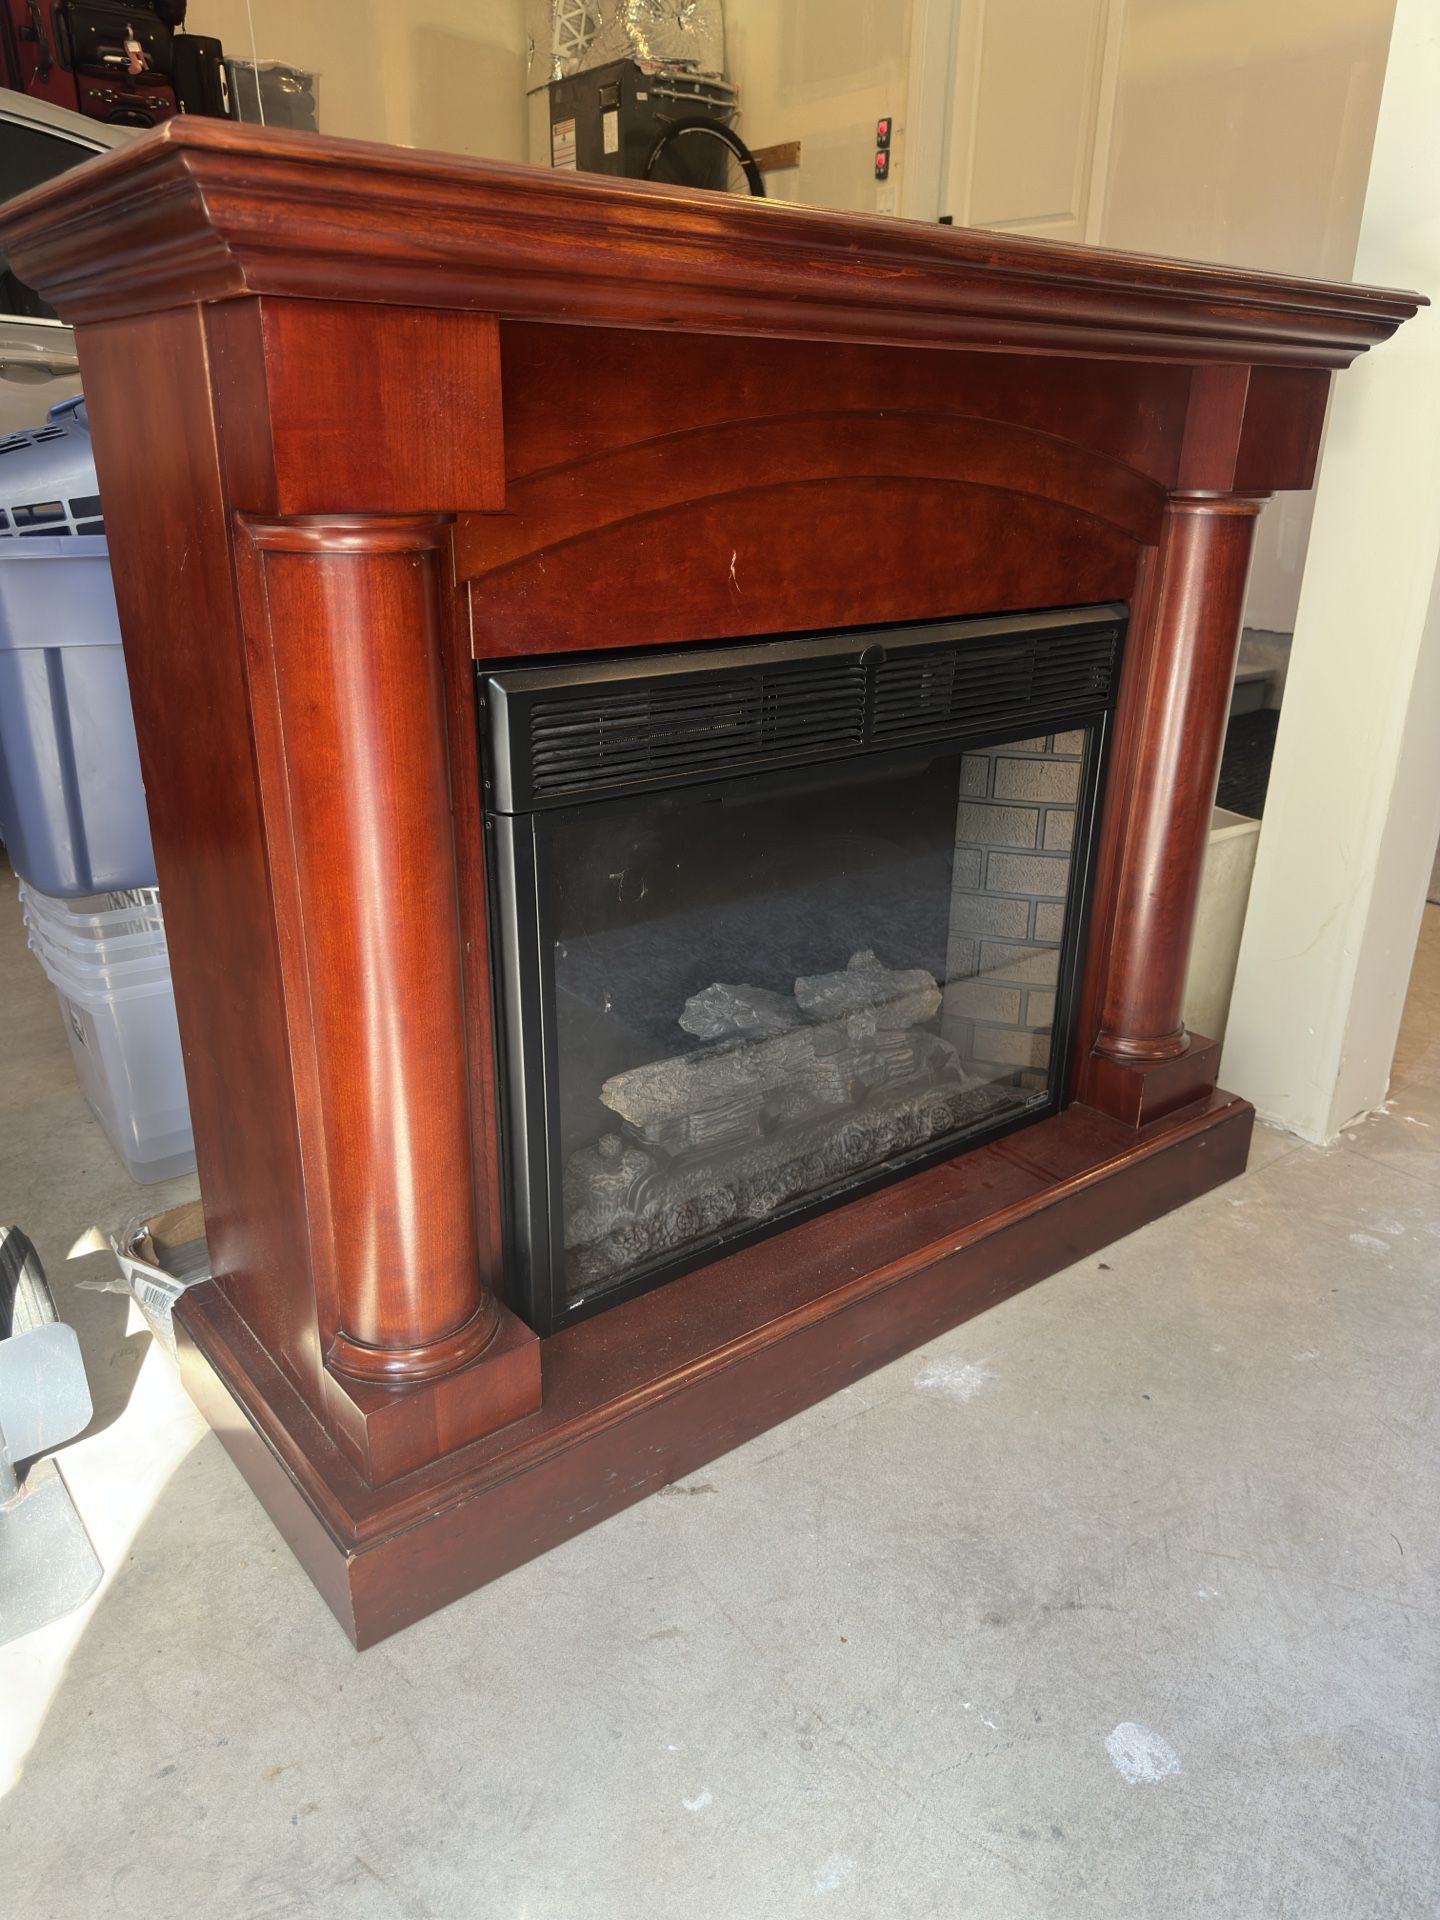 FREE Electric Fireplace